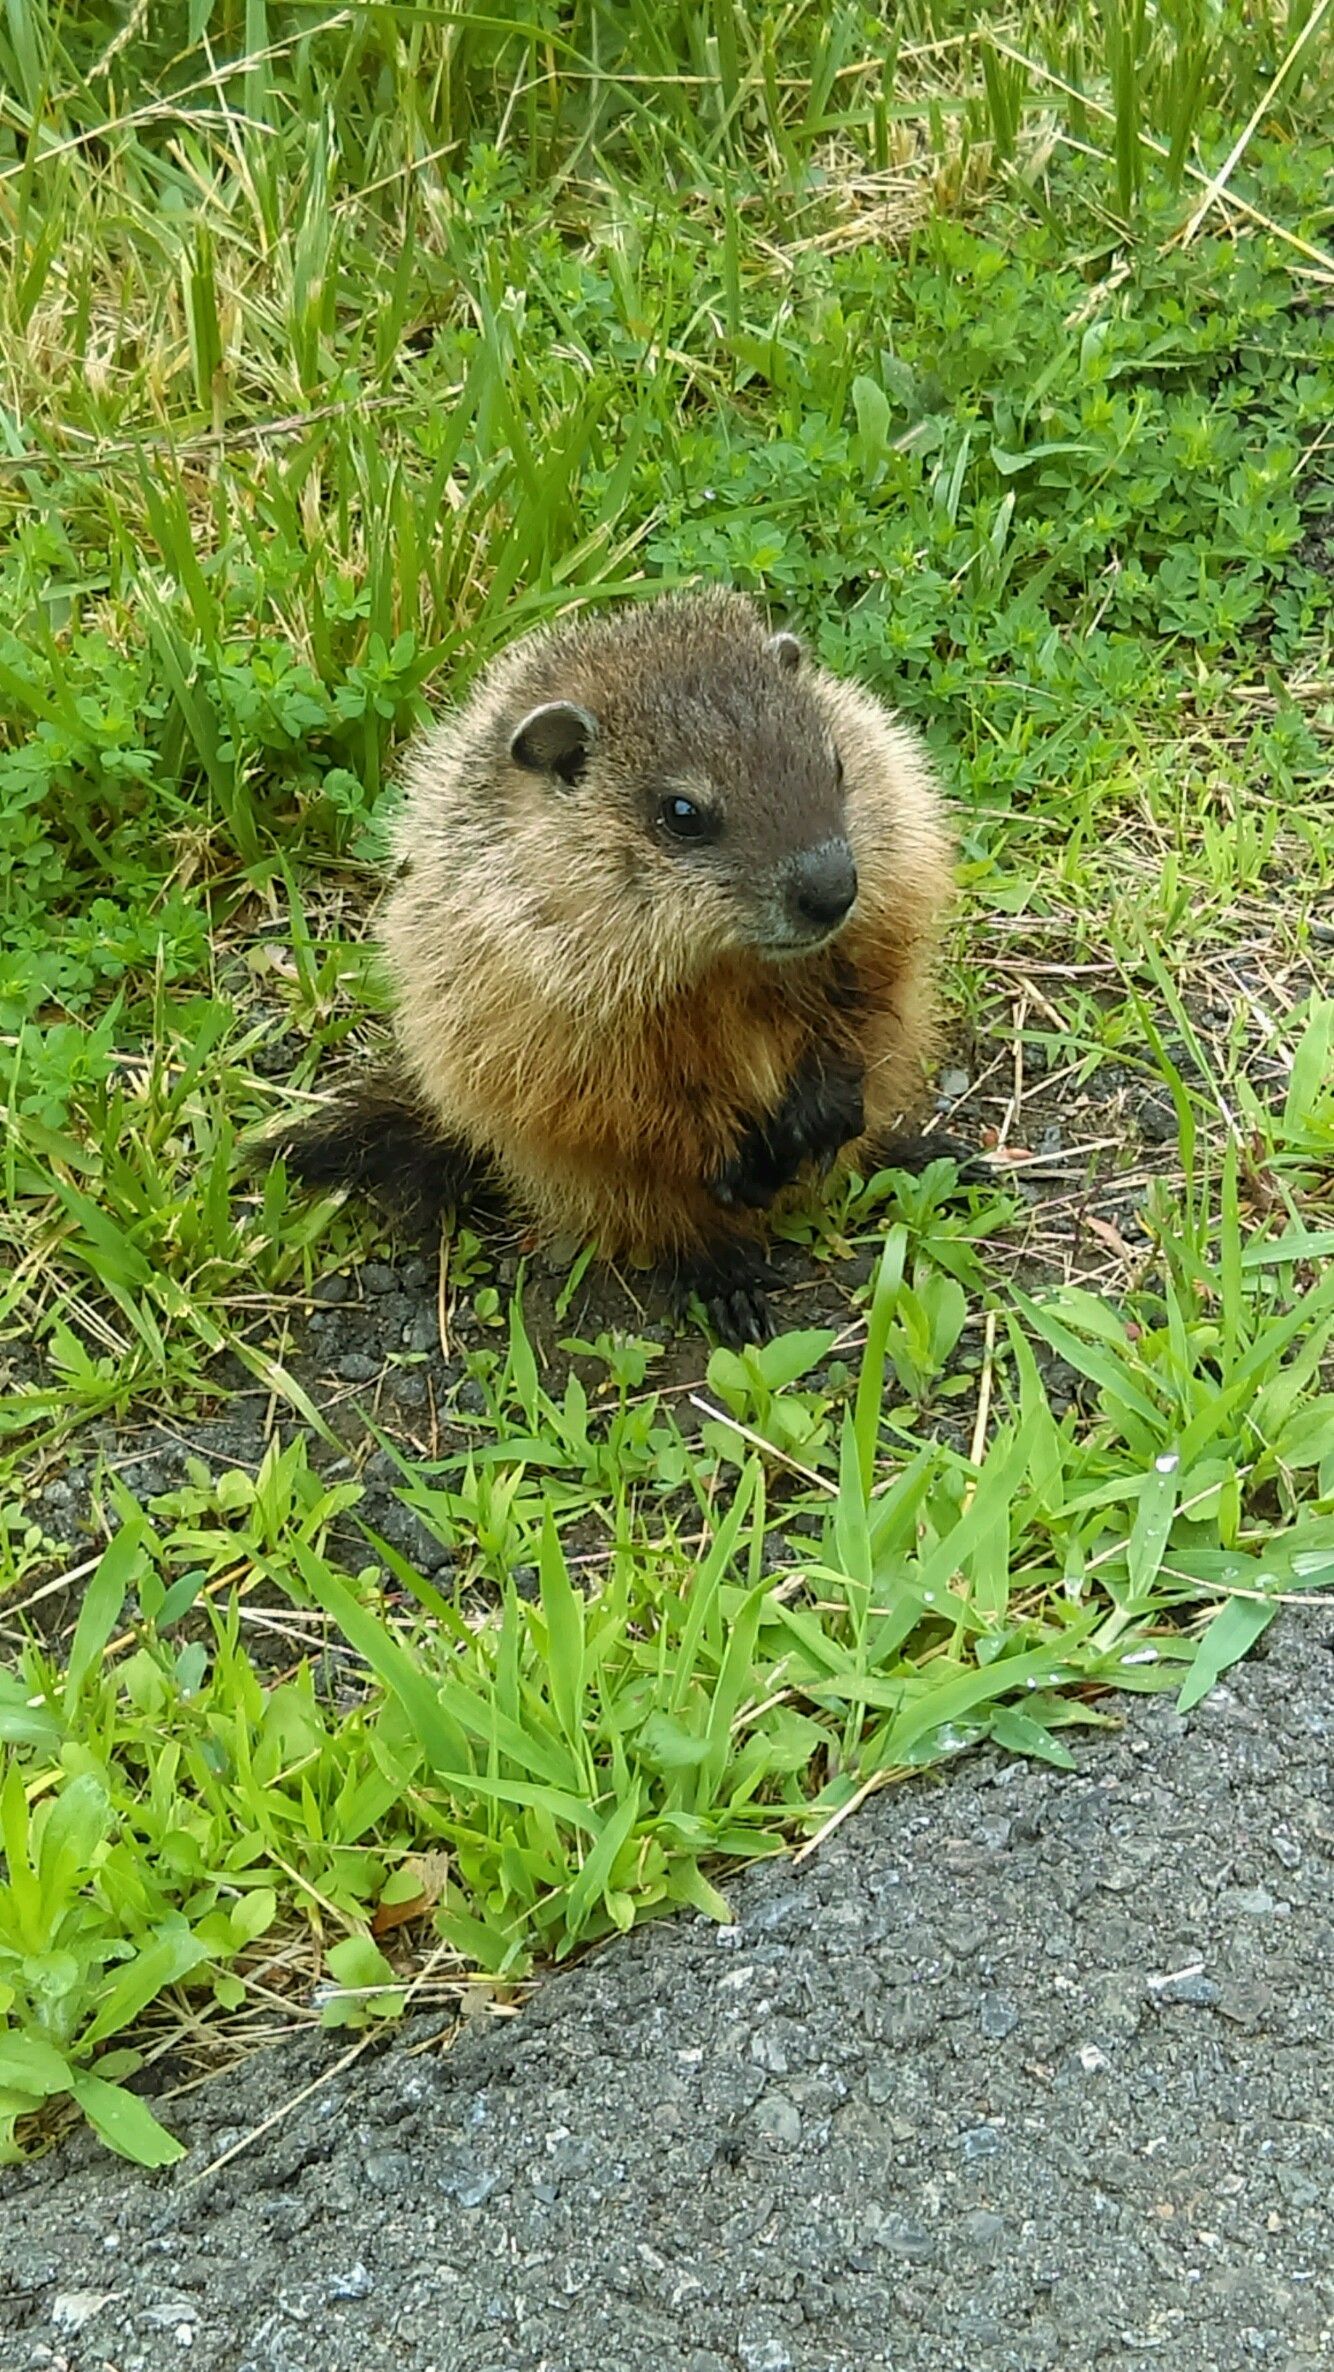 This baby woodchuck lives around my apartment HD Wallpaper